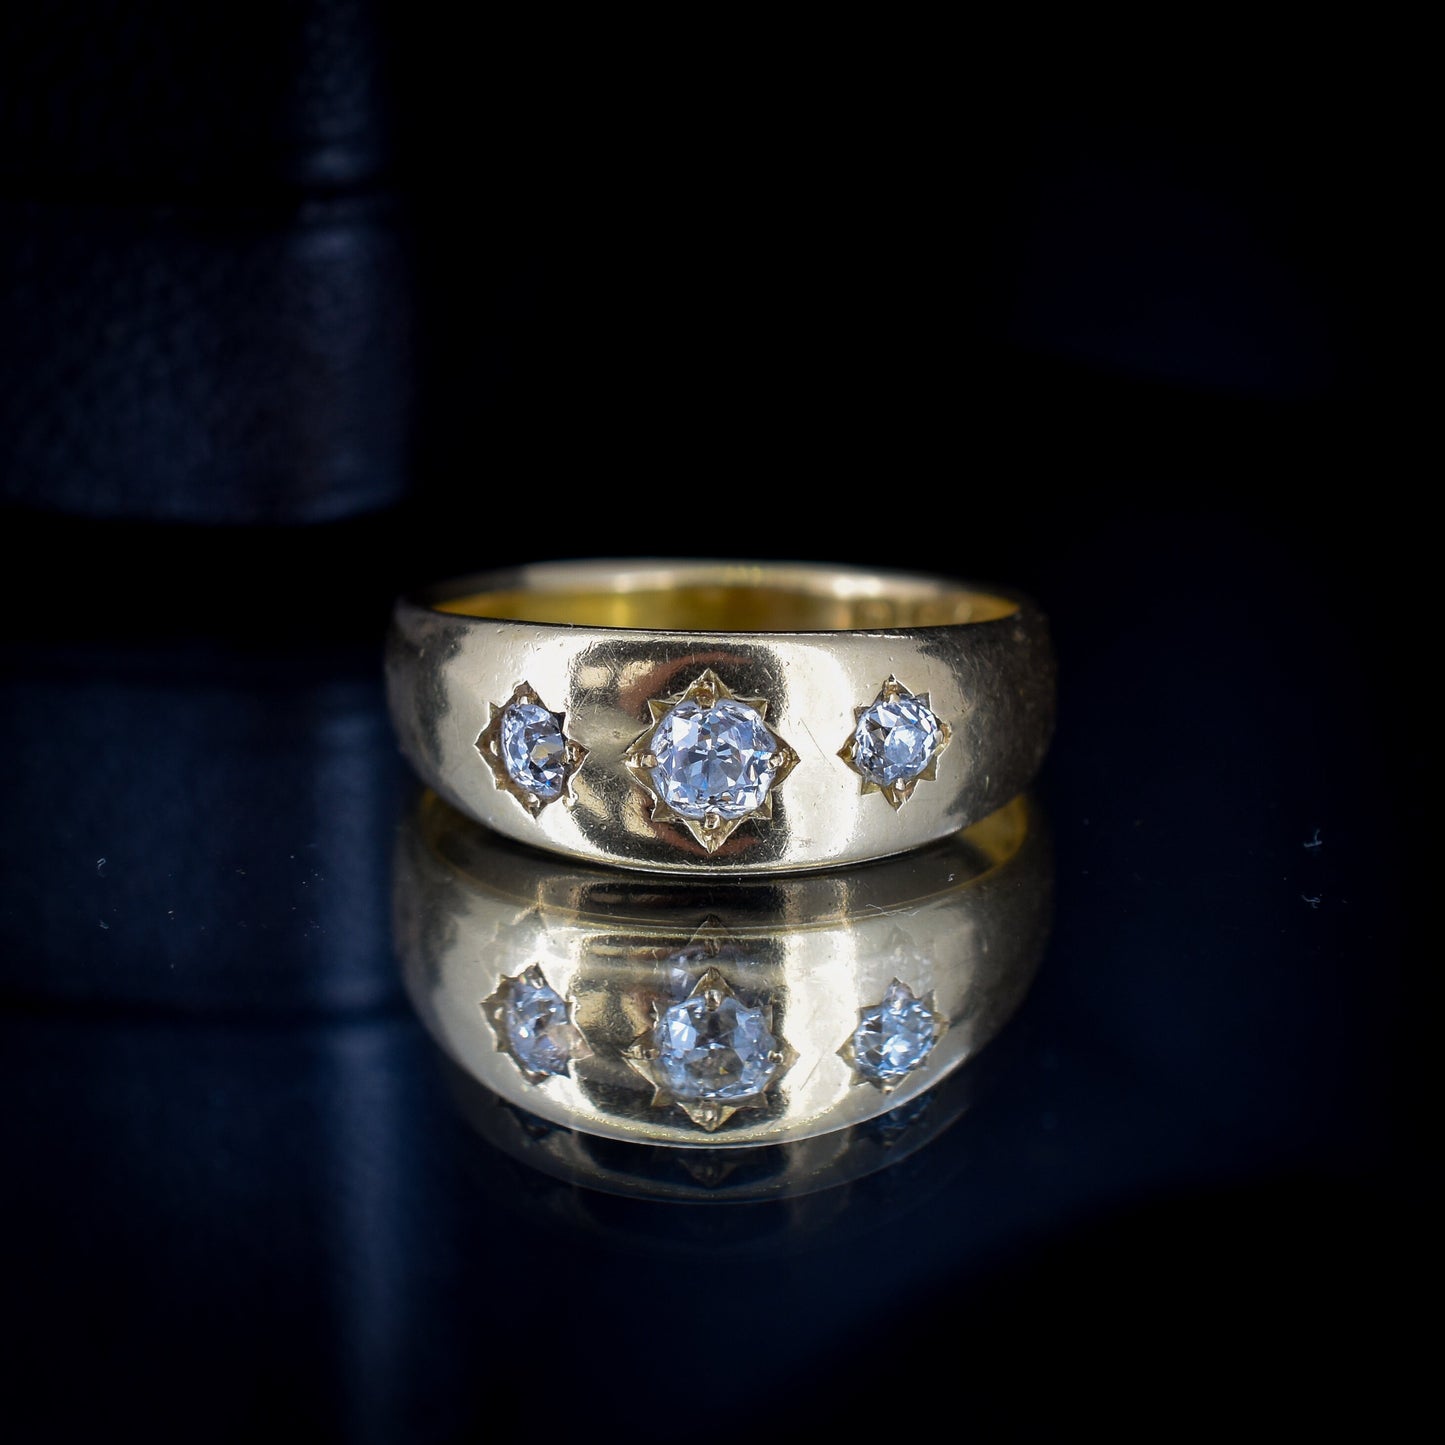 Antique Old Cut Diamond Three Stone Gypsy Starburst 18ct Gold Ring | Dated 1896